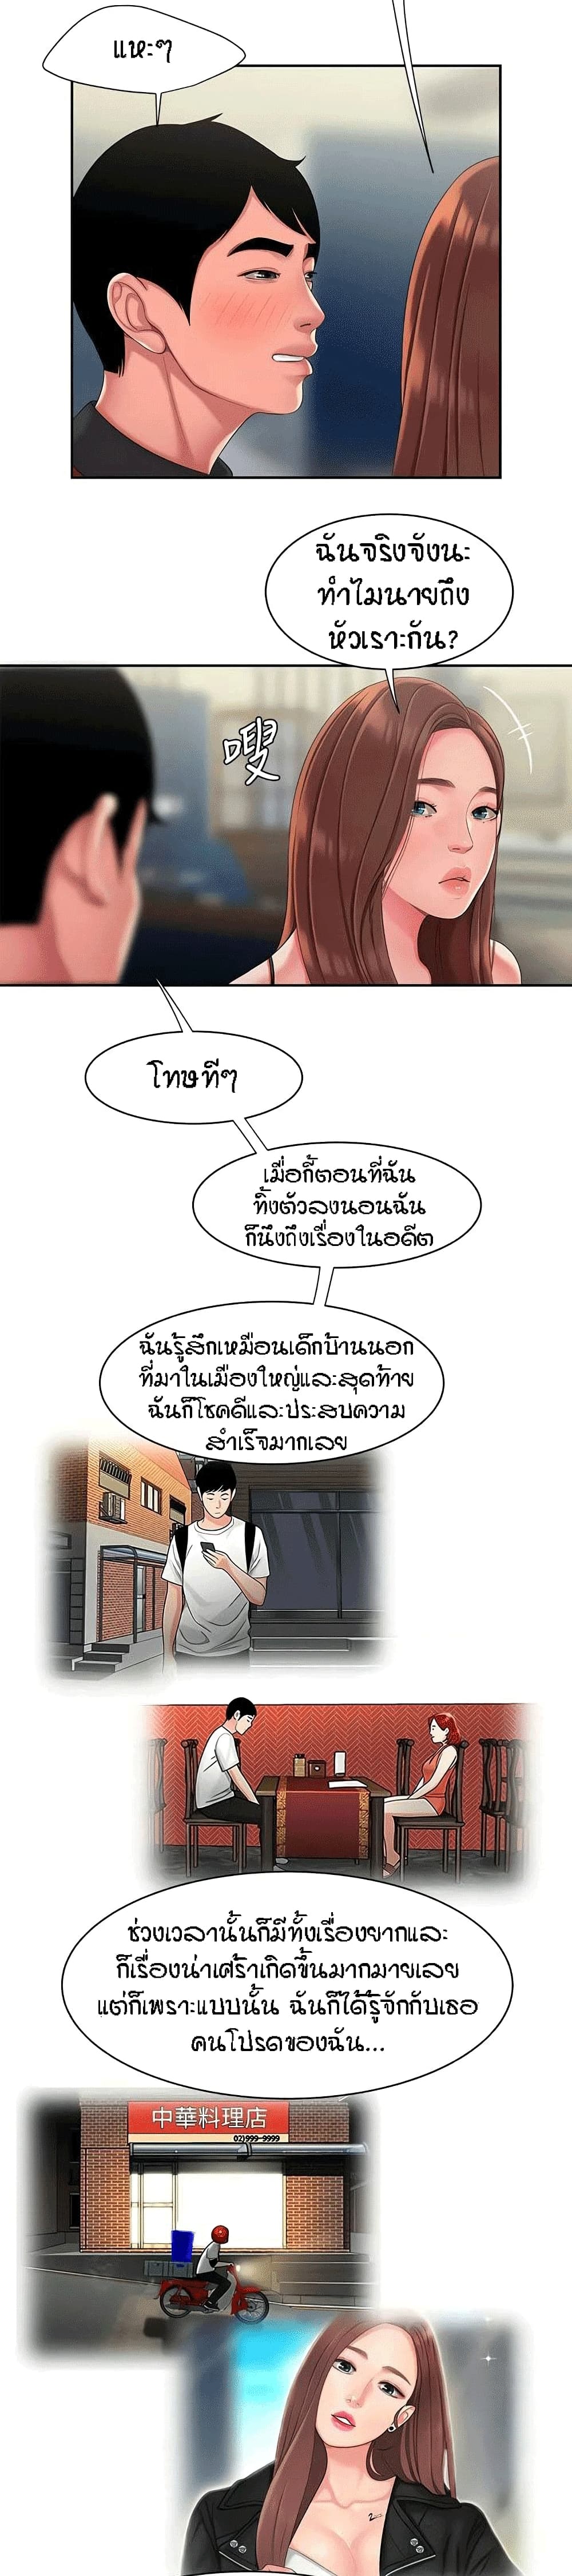 Delivery Man 55-ตอนจบ